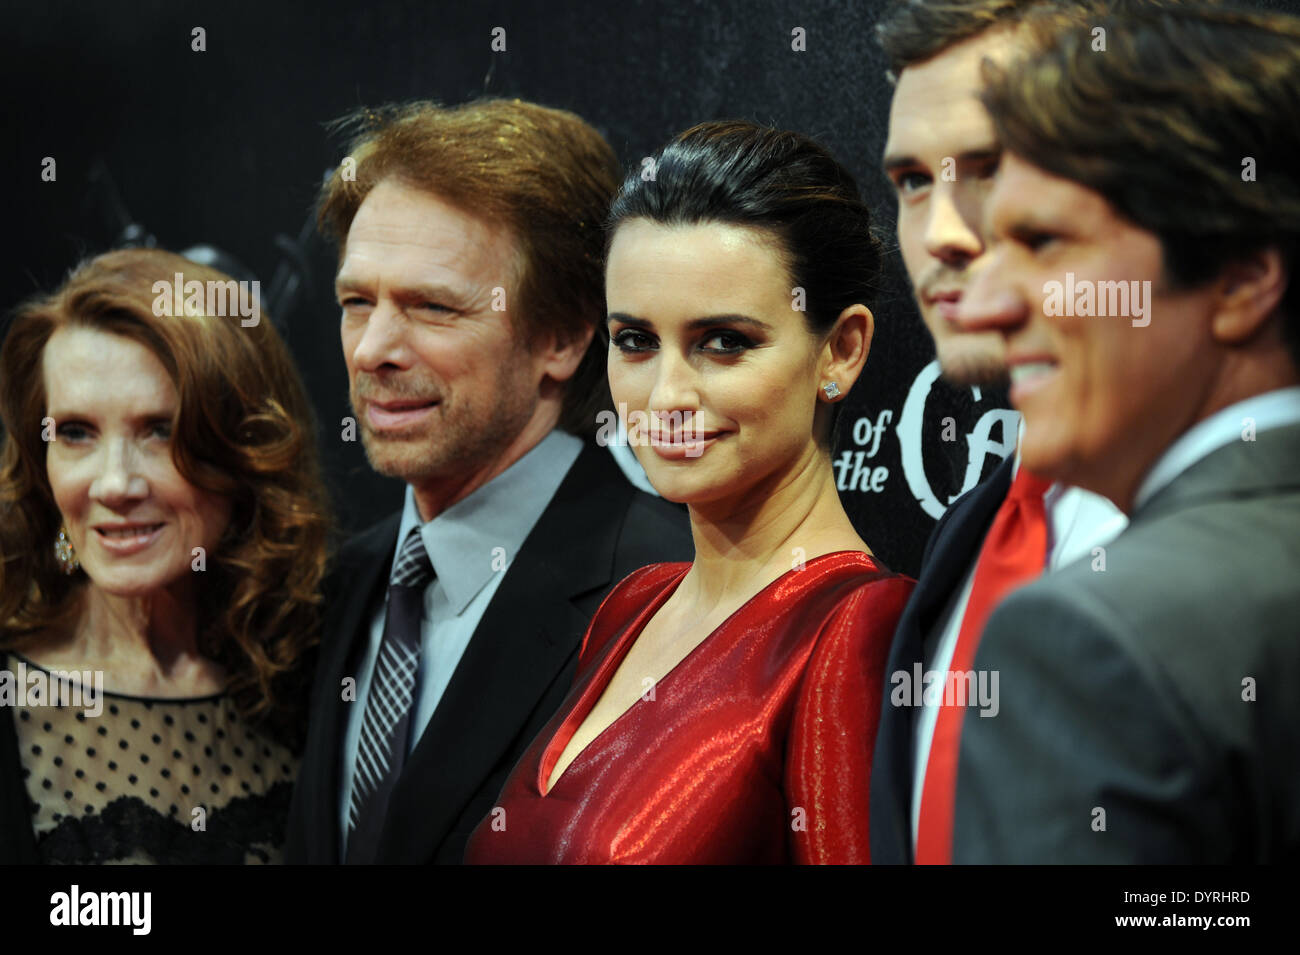 Penelope Cruz and Jerry Bruckheimer at the film premiere of 'Pirates of the Caribbean 4' in Munich, 2011 Stock Photo